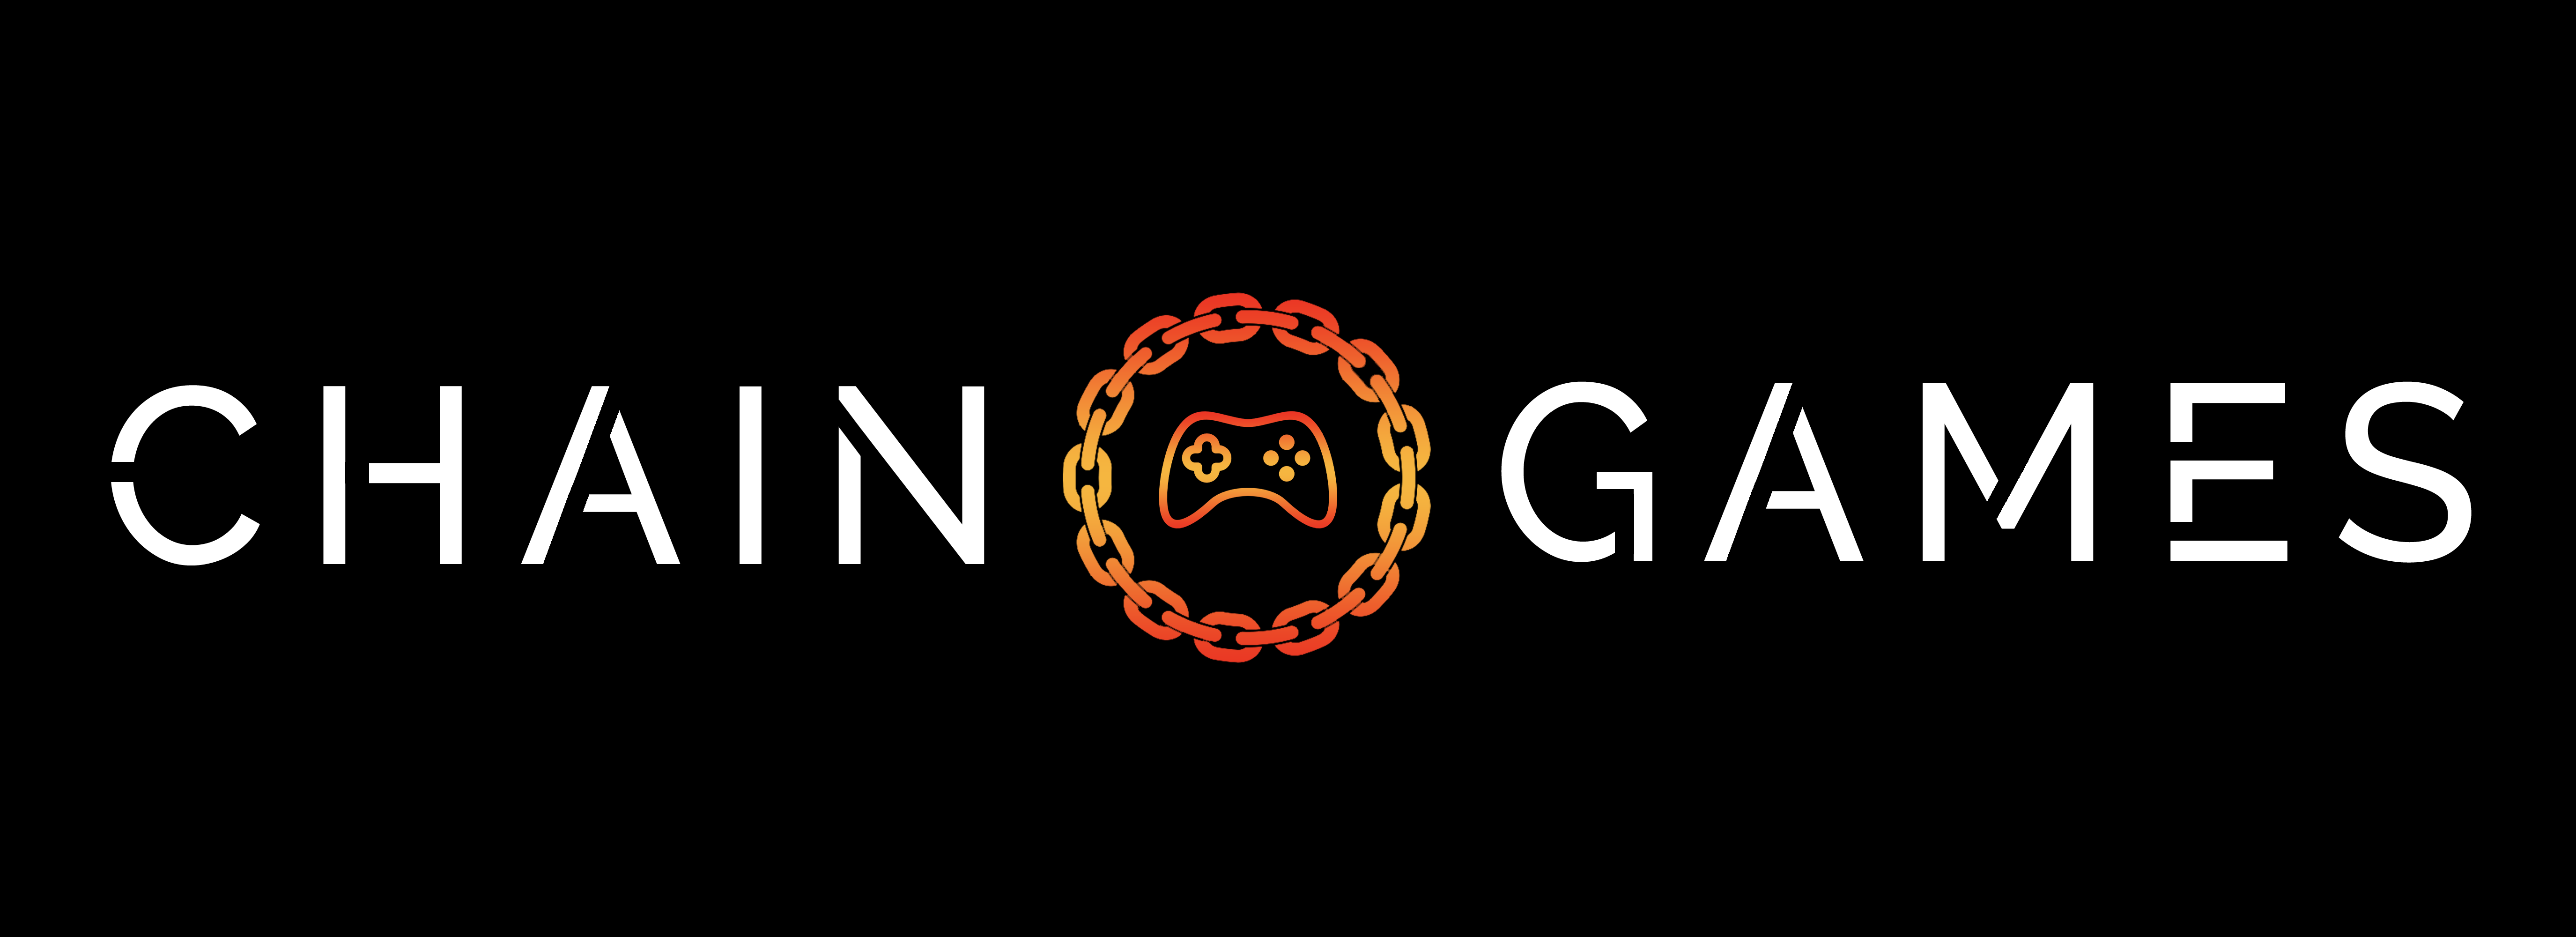 Chain Games Logo.png